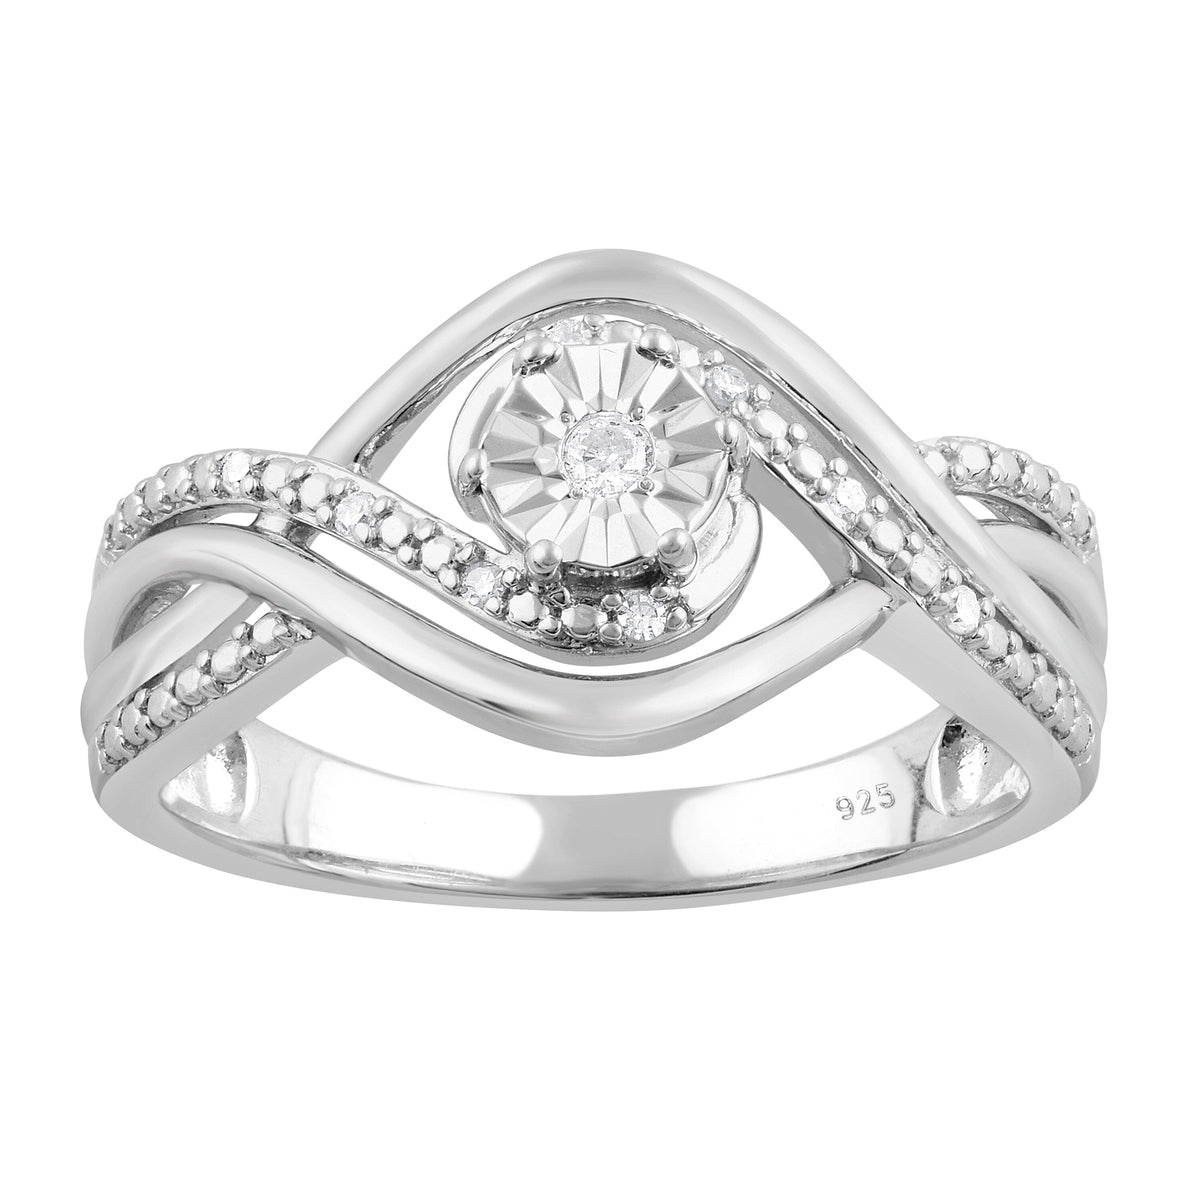 Miracle Surround Ring with 0.05ct of Diamonds in Sterling Silver Rings Bevilles 